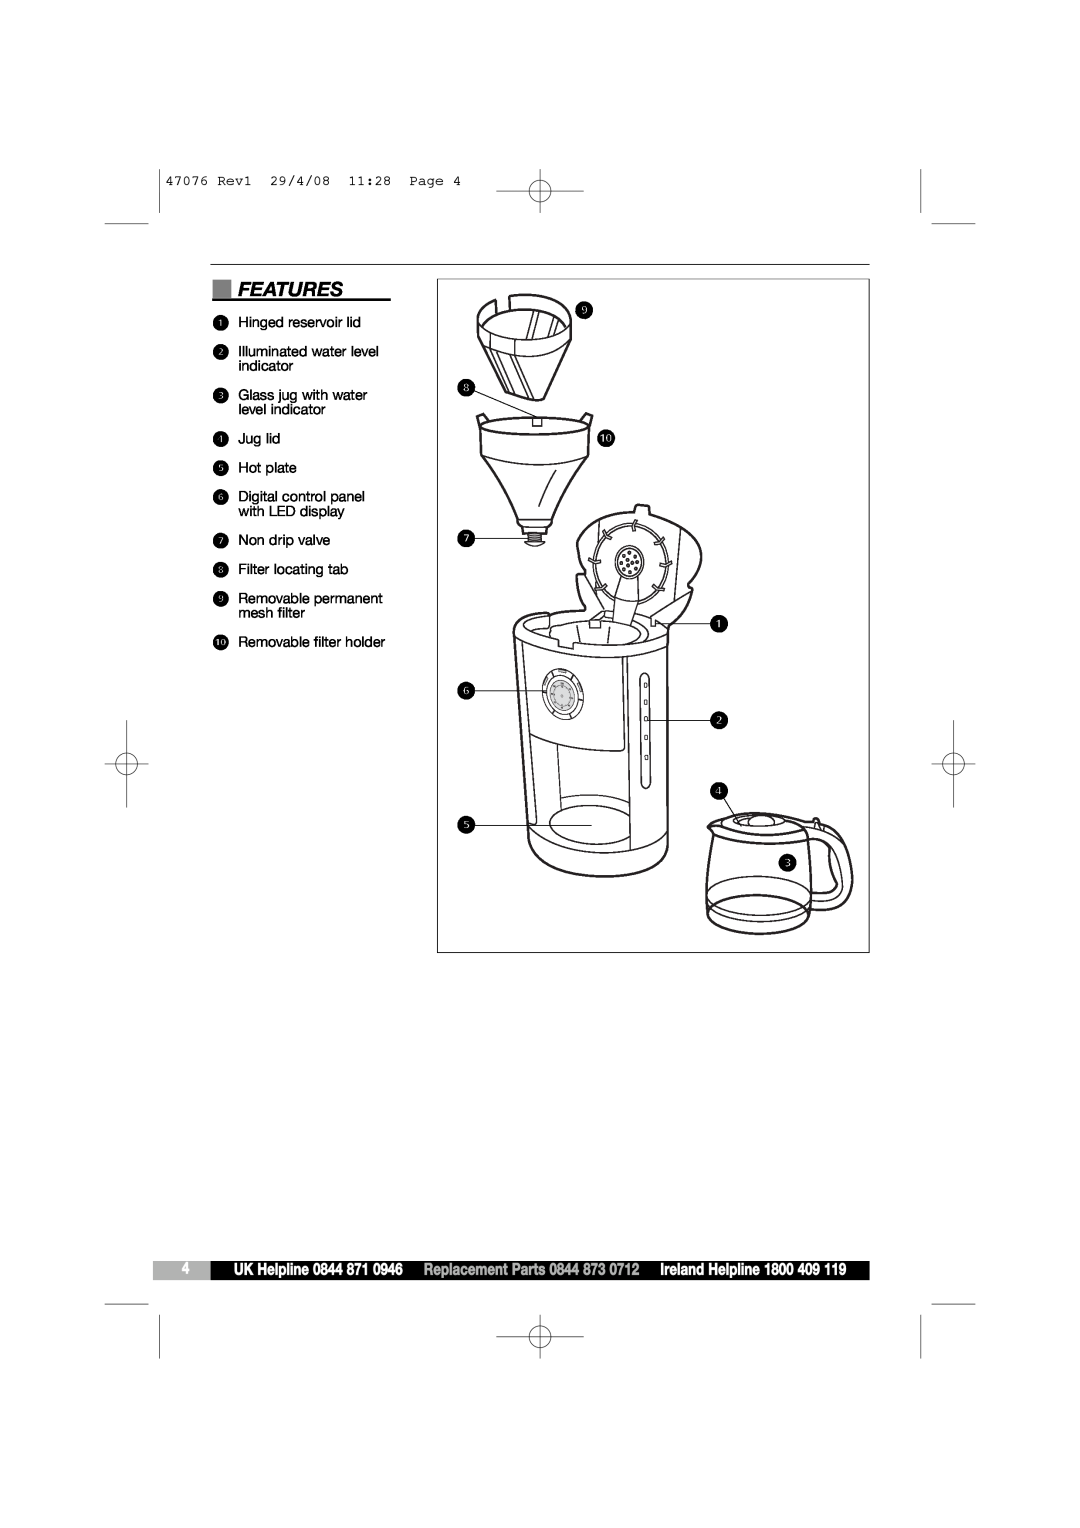 Morphy Richards manual Features, ‚ · „ ‡ ⁄ ﬂ ¤ › ﬁ ‹, 47076 Rev1 29/4/08 1128 Page 